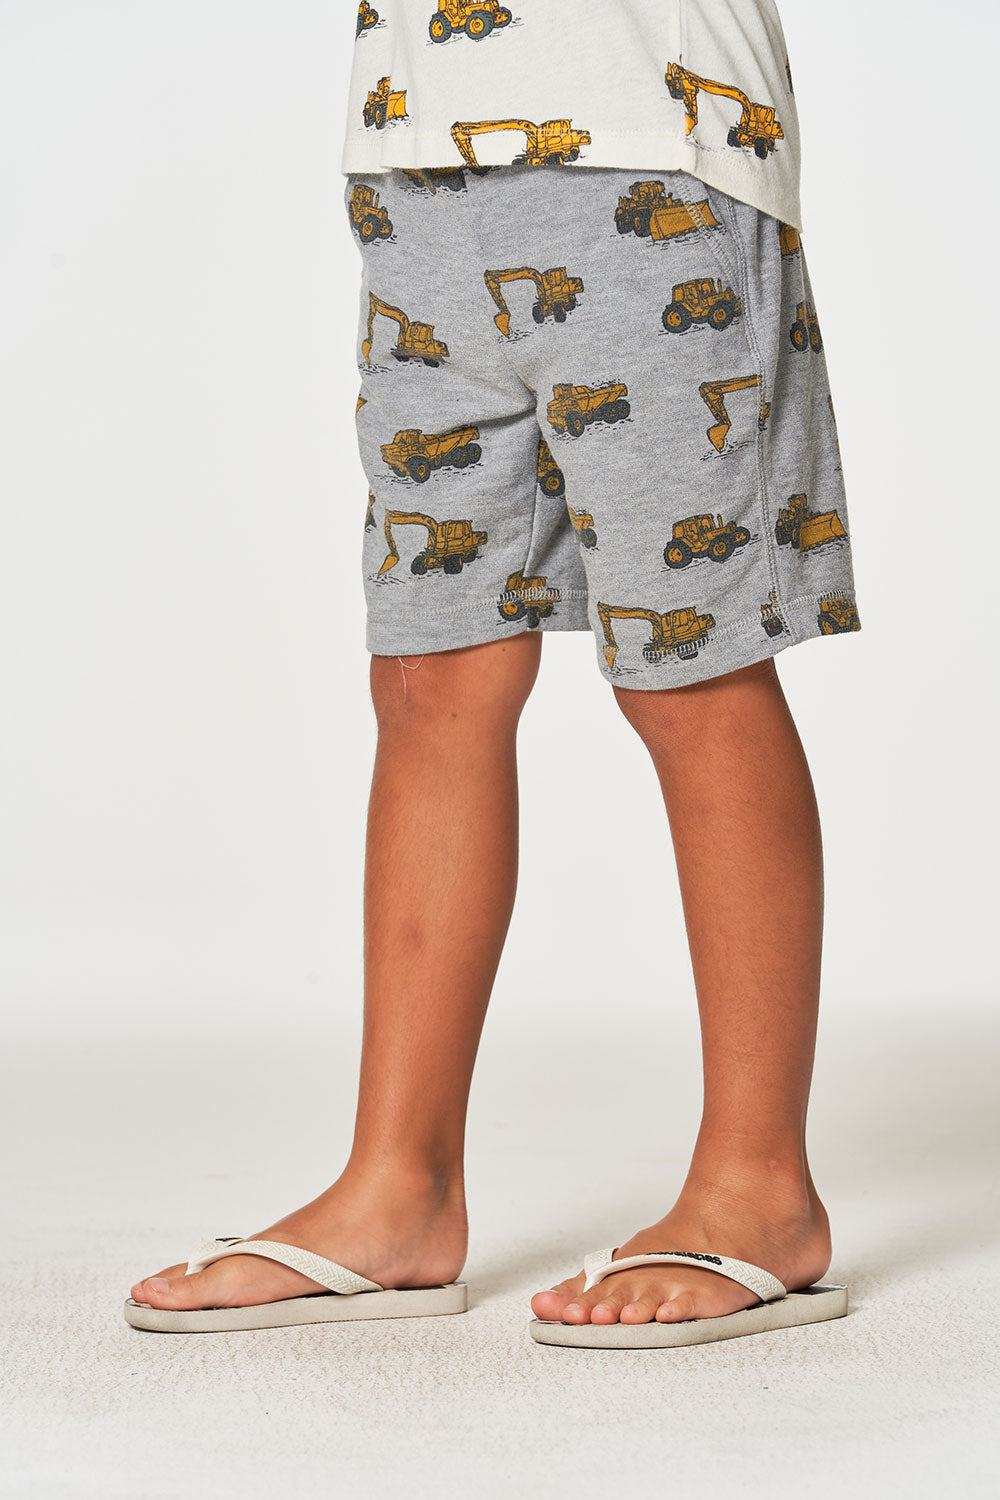 Tractor Zones Boys Shorts Boys chaserbrand